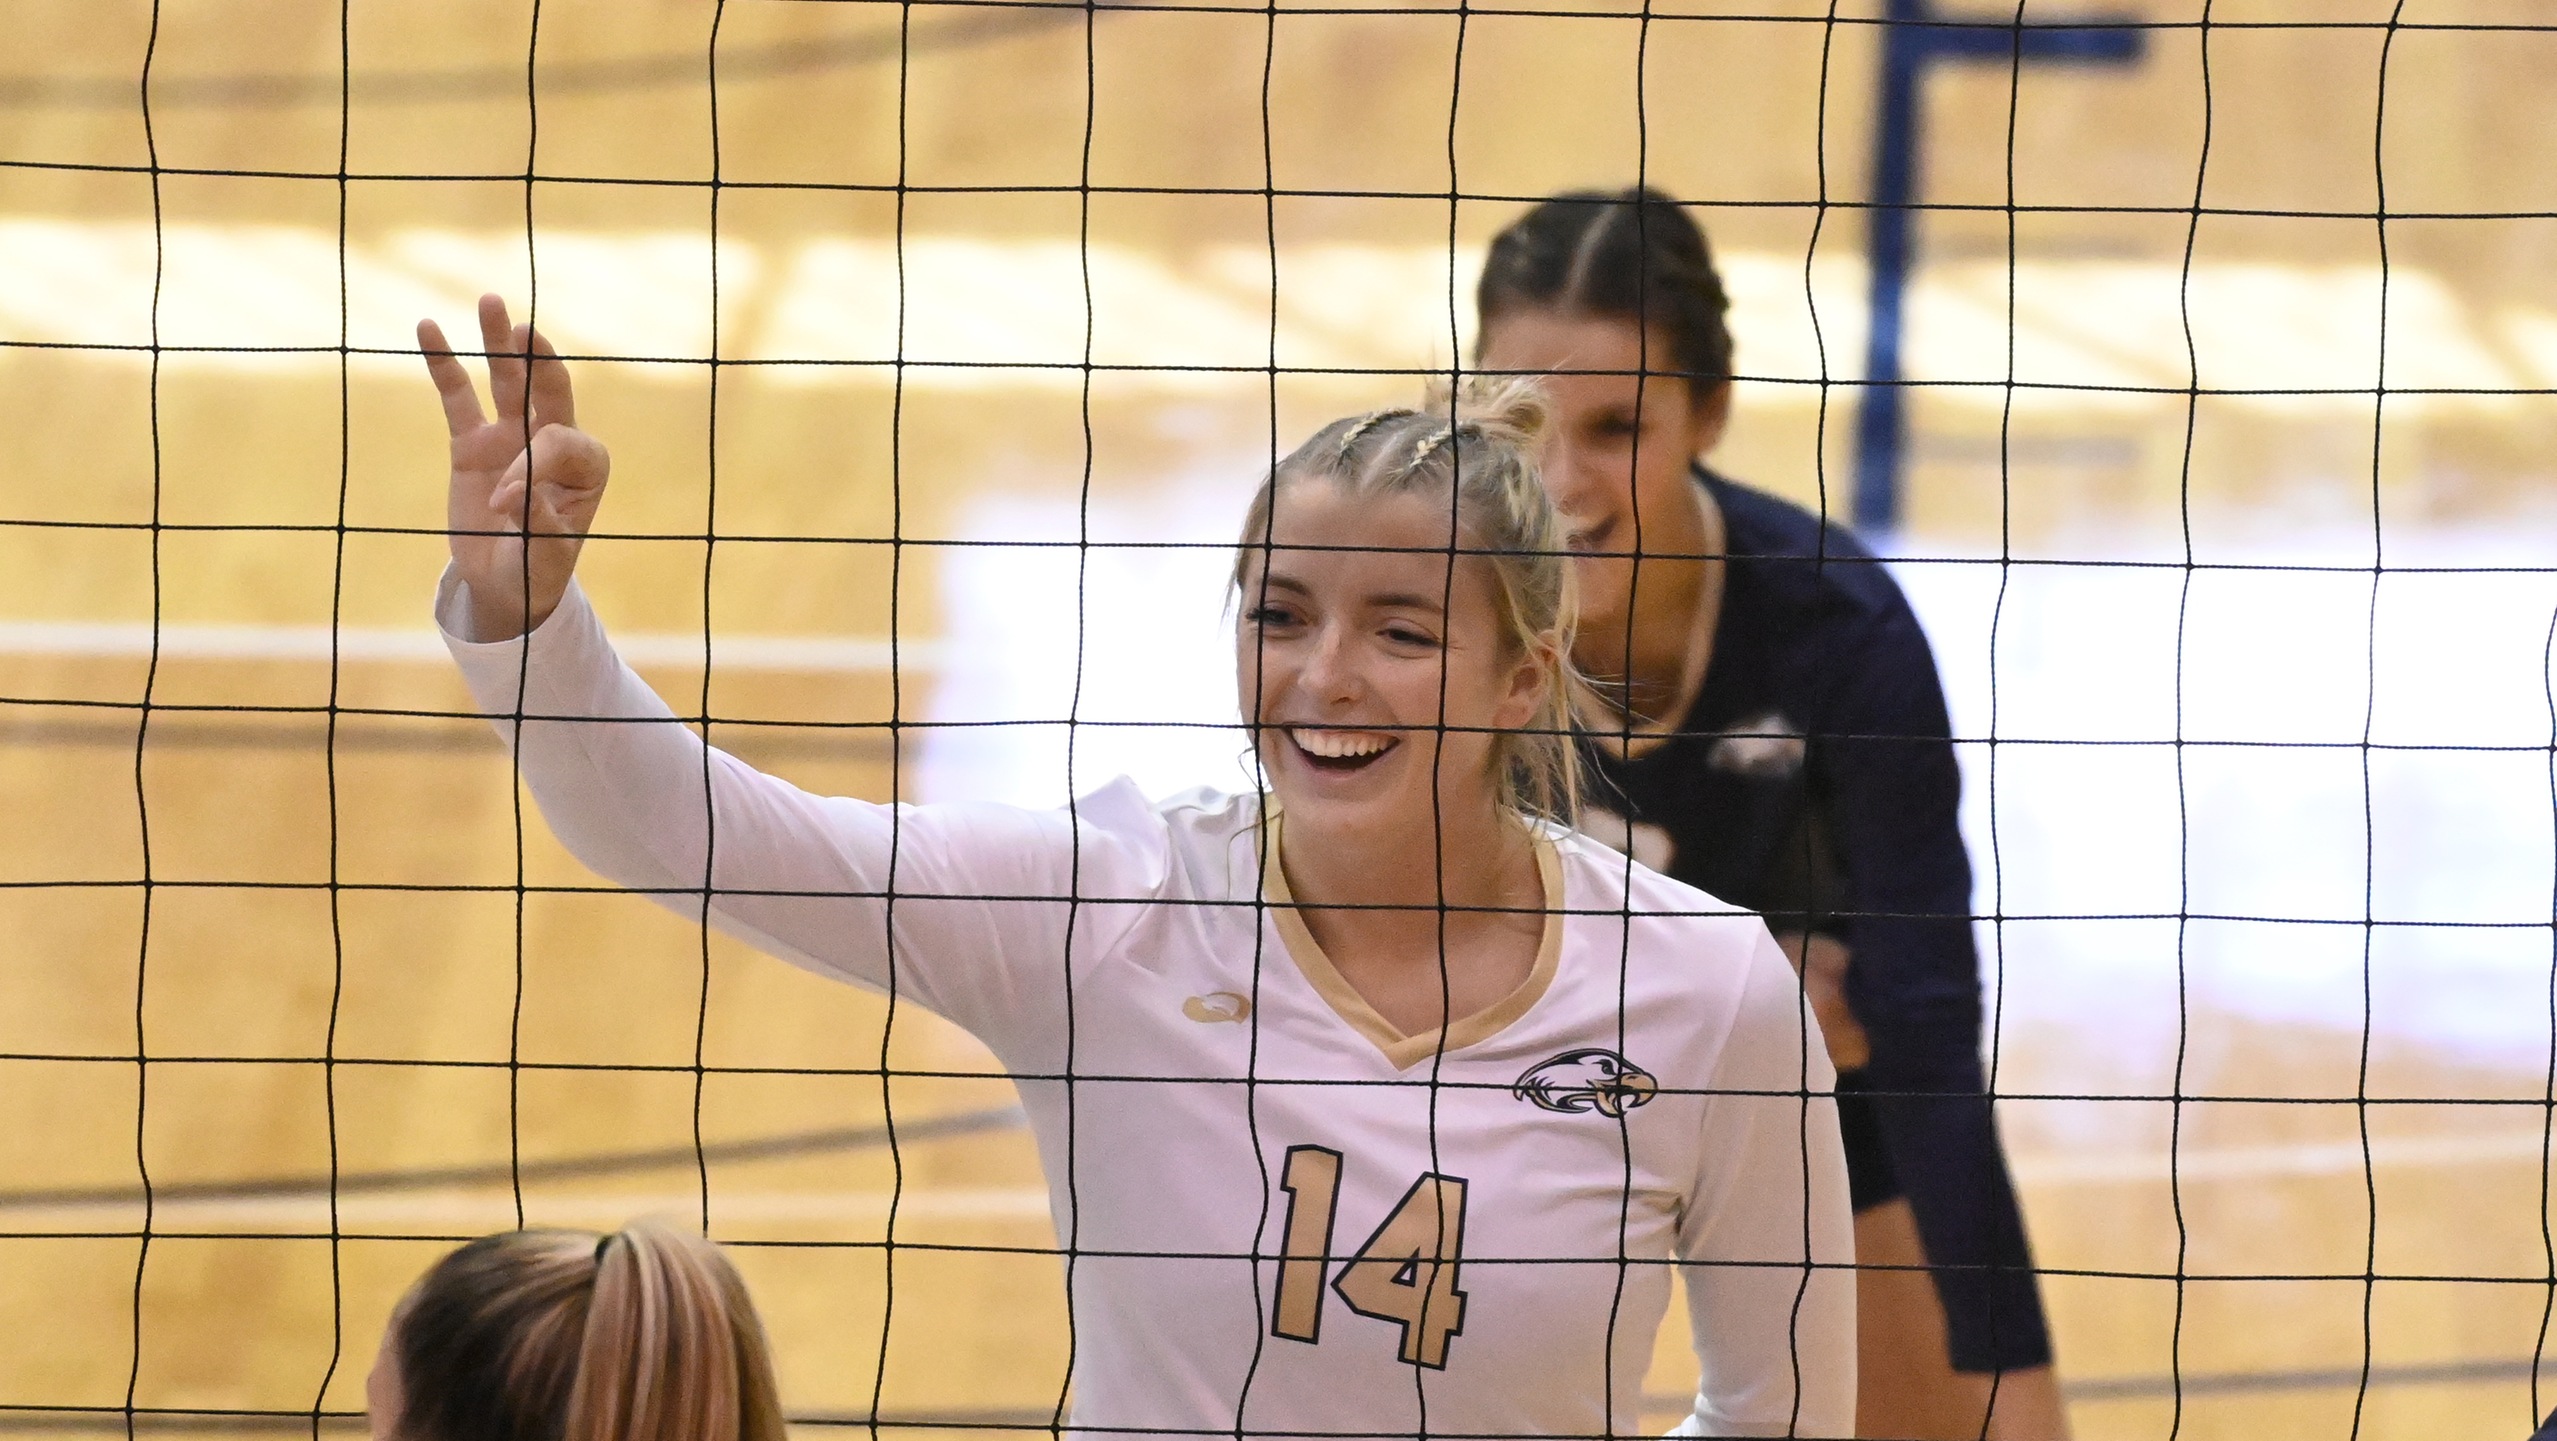 Eagles Cruise Past Greyhounds, Rangers as Taylor Crosses 1000 Kill Mark